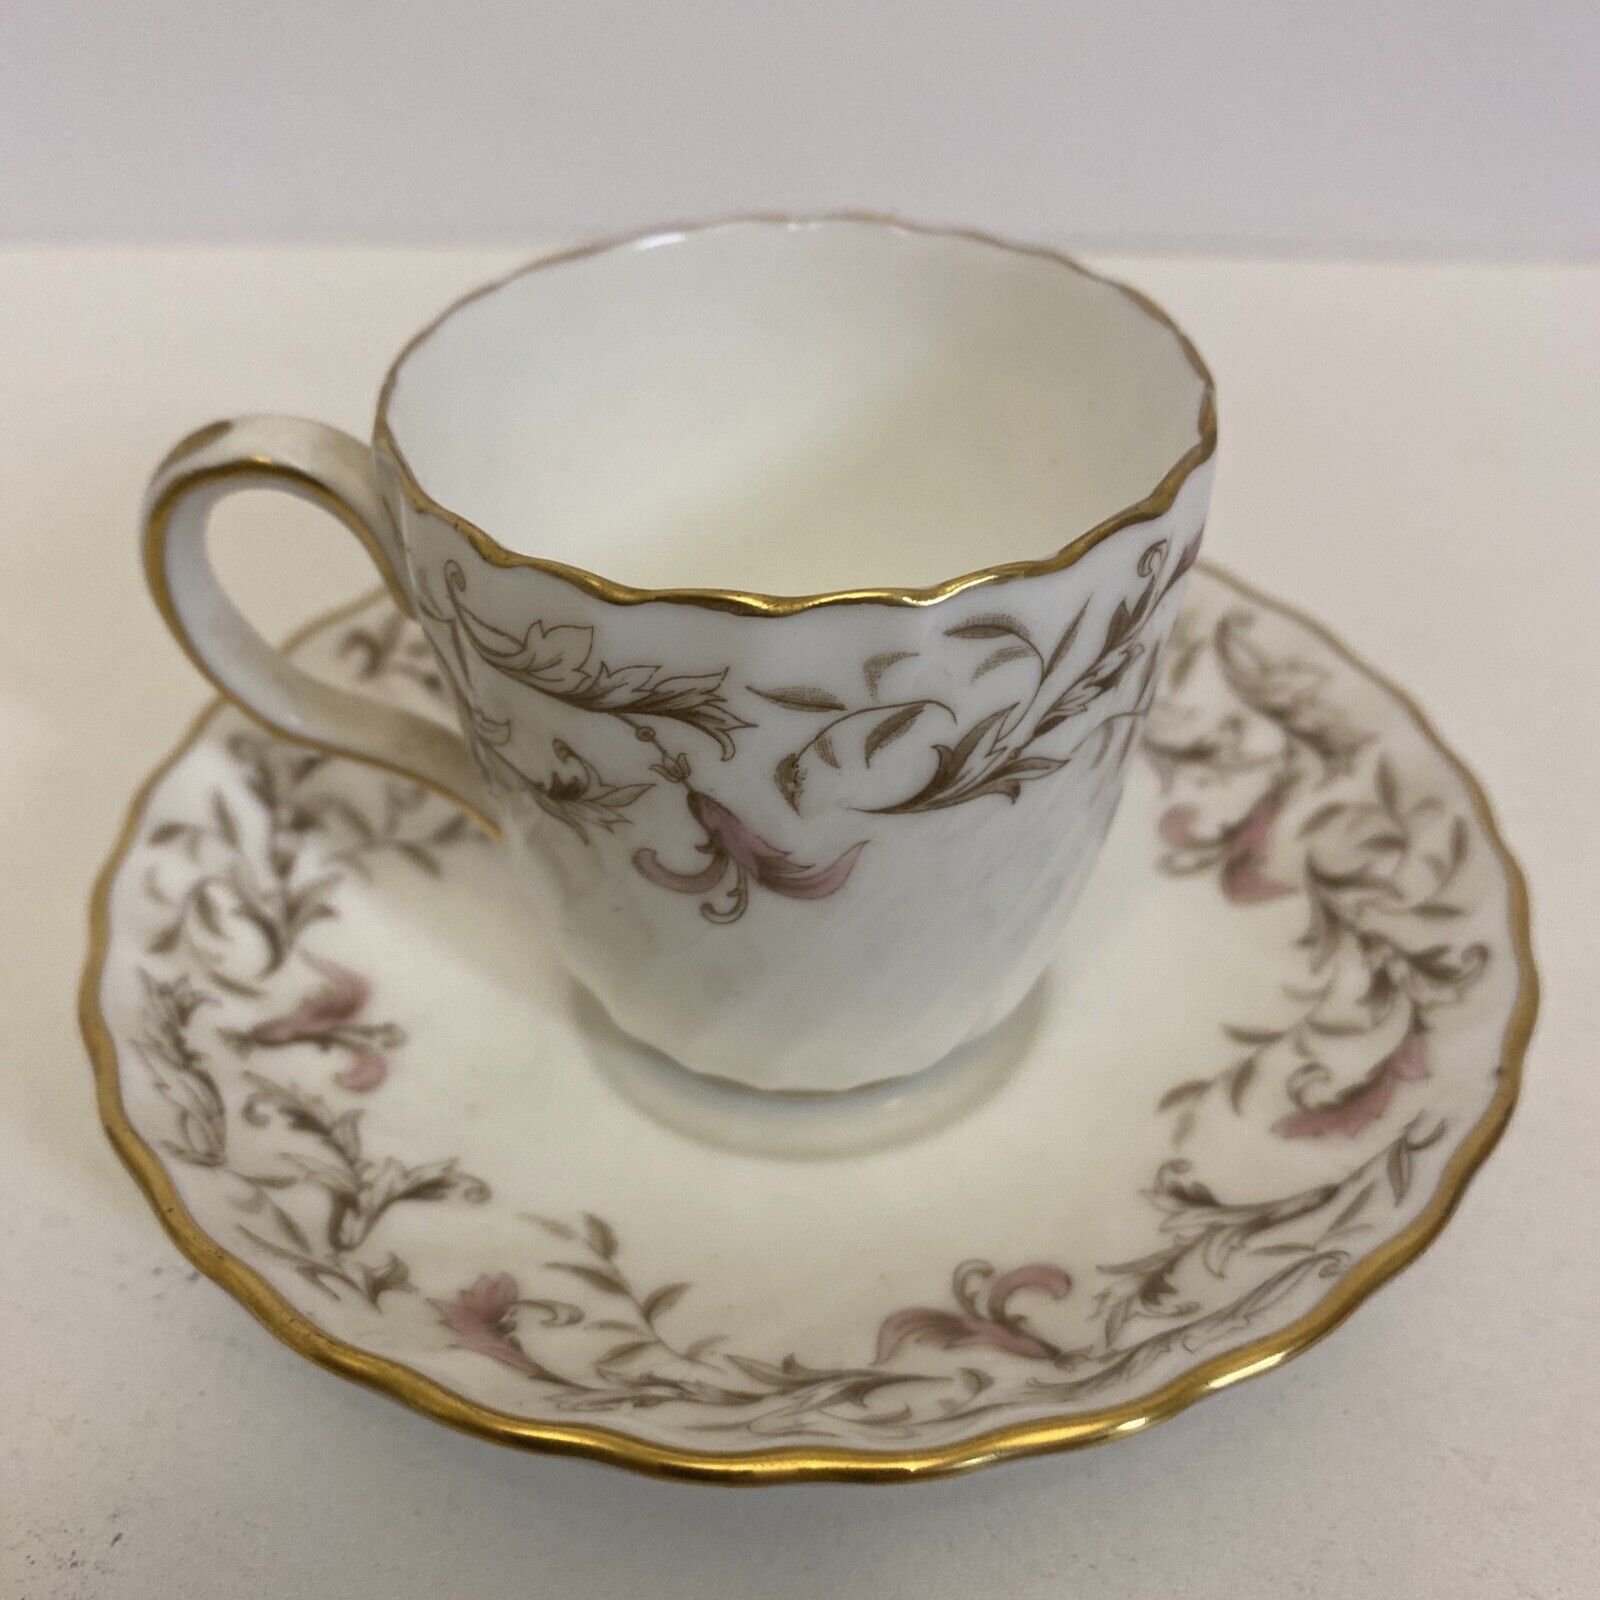 Minton Moorland Pattern Number S697 Cup and Saucer Set Bone China